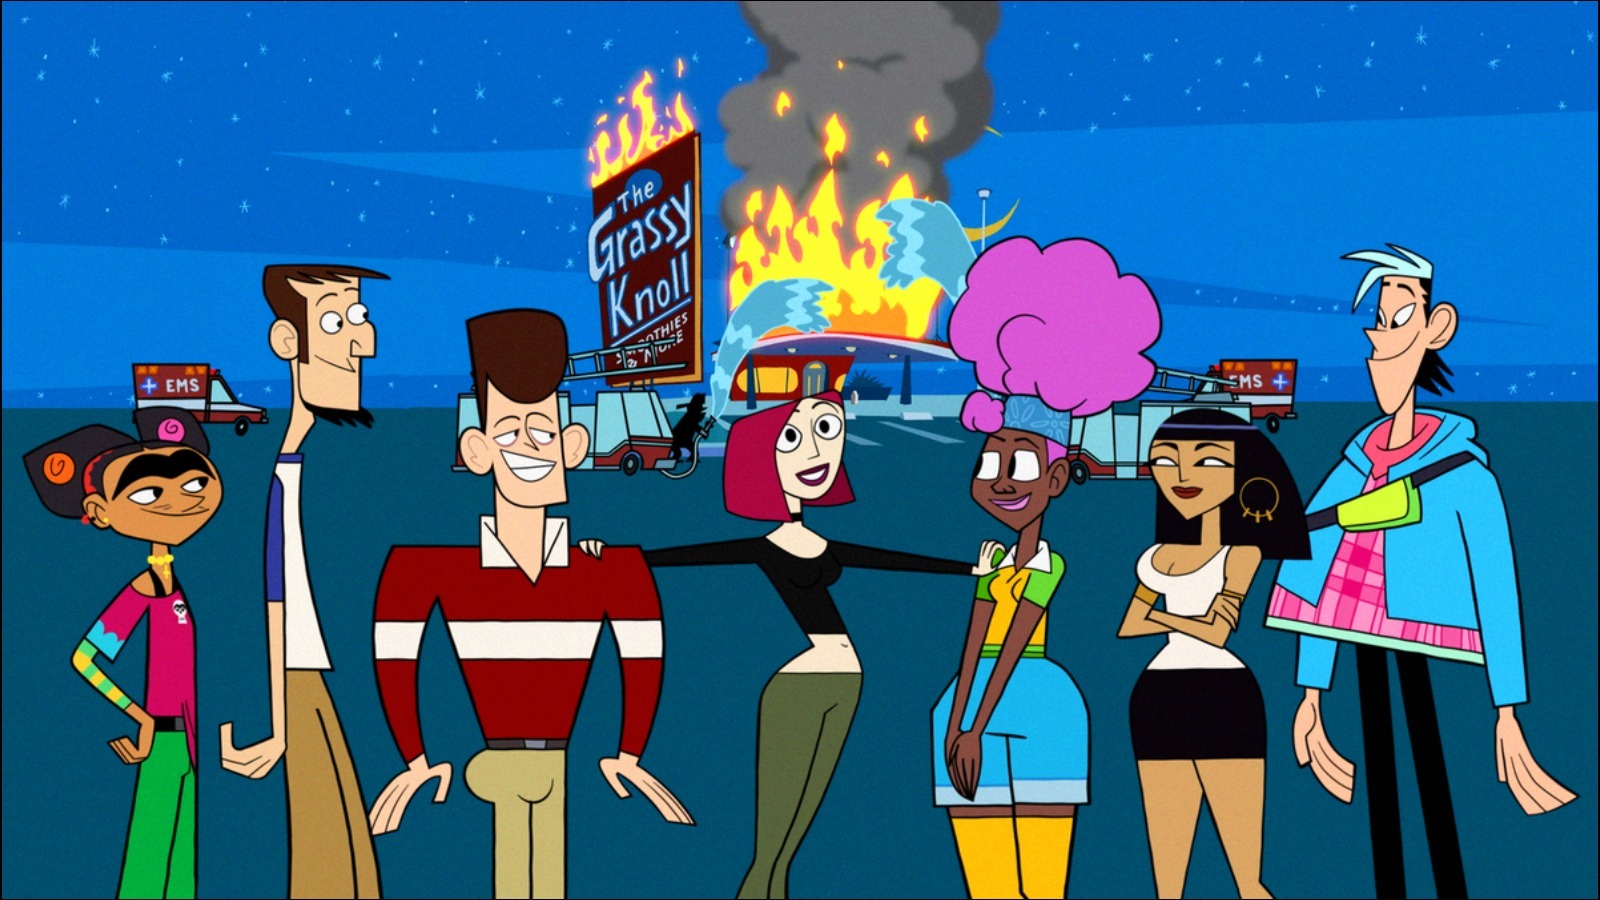 Will Forte Returns In First Look At Clone High Revival, With New Cast Members Revealed – /Film